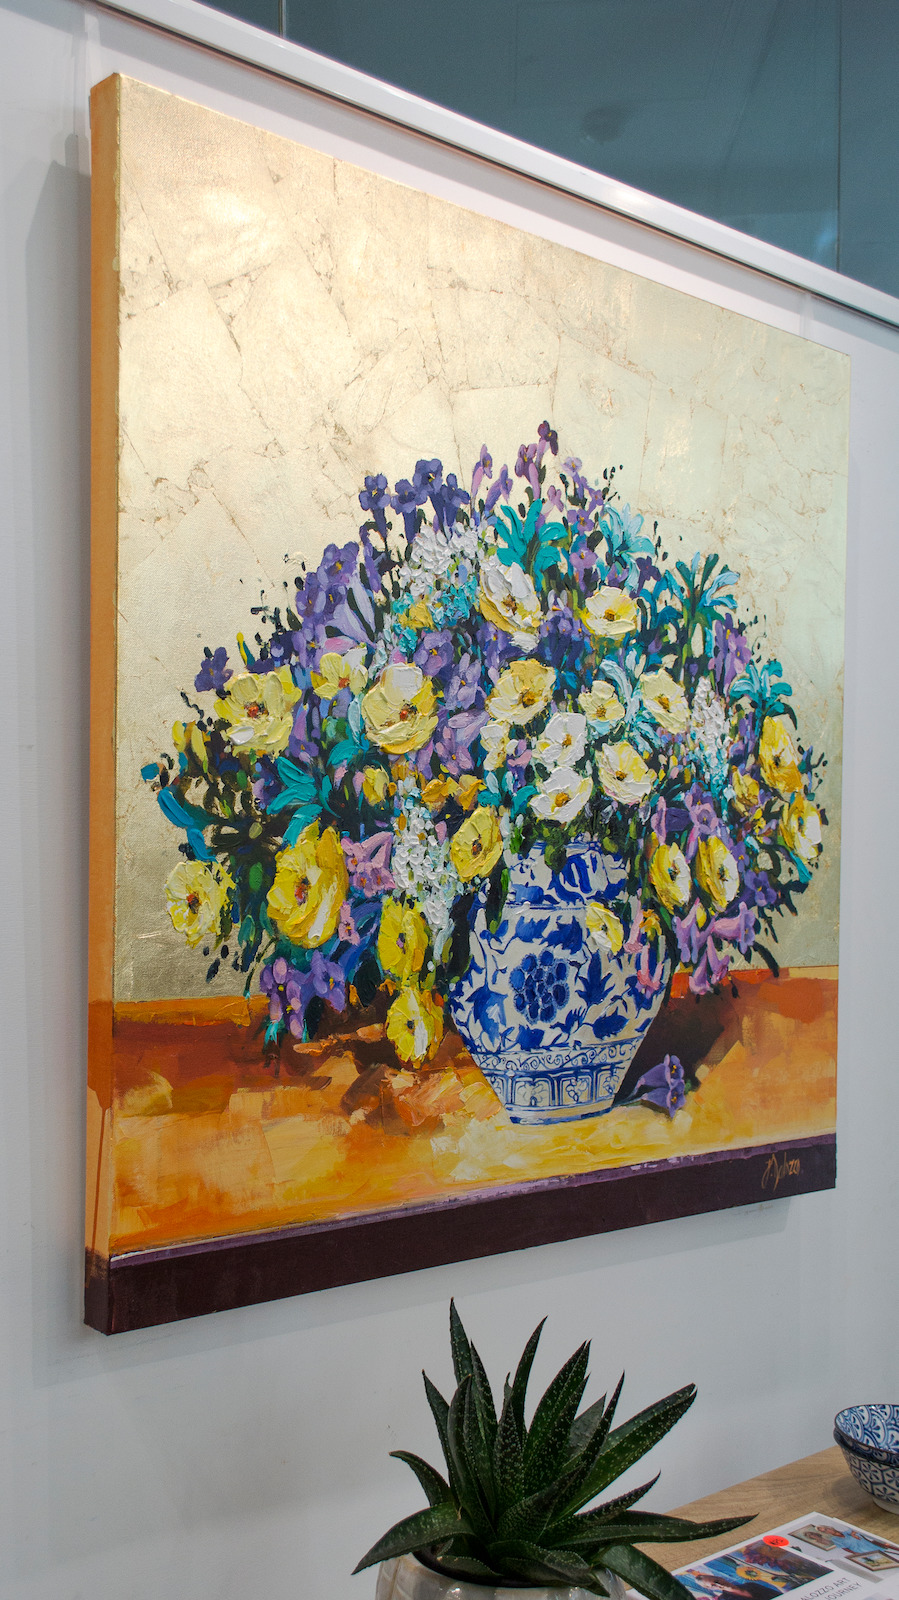 Wall Design Ideas 2 With Still Life Painting "Jacarandas in Bloom" By Judith Dalozzo